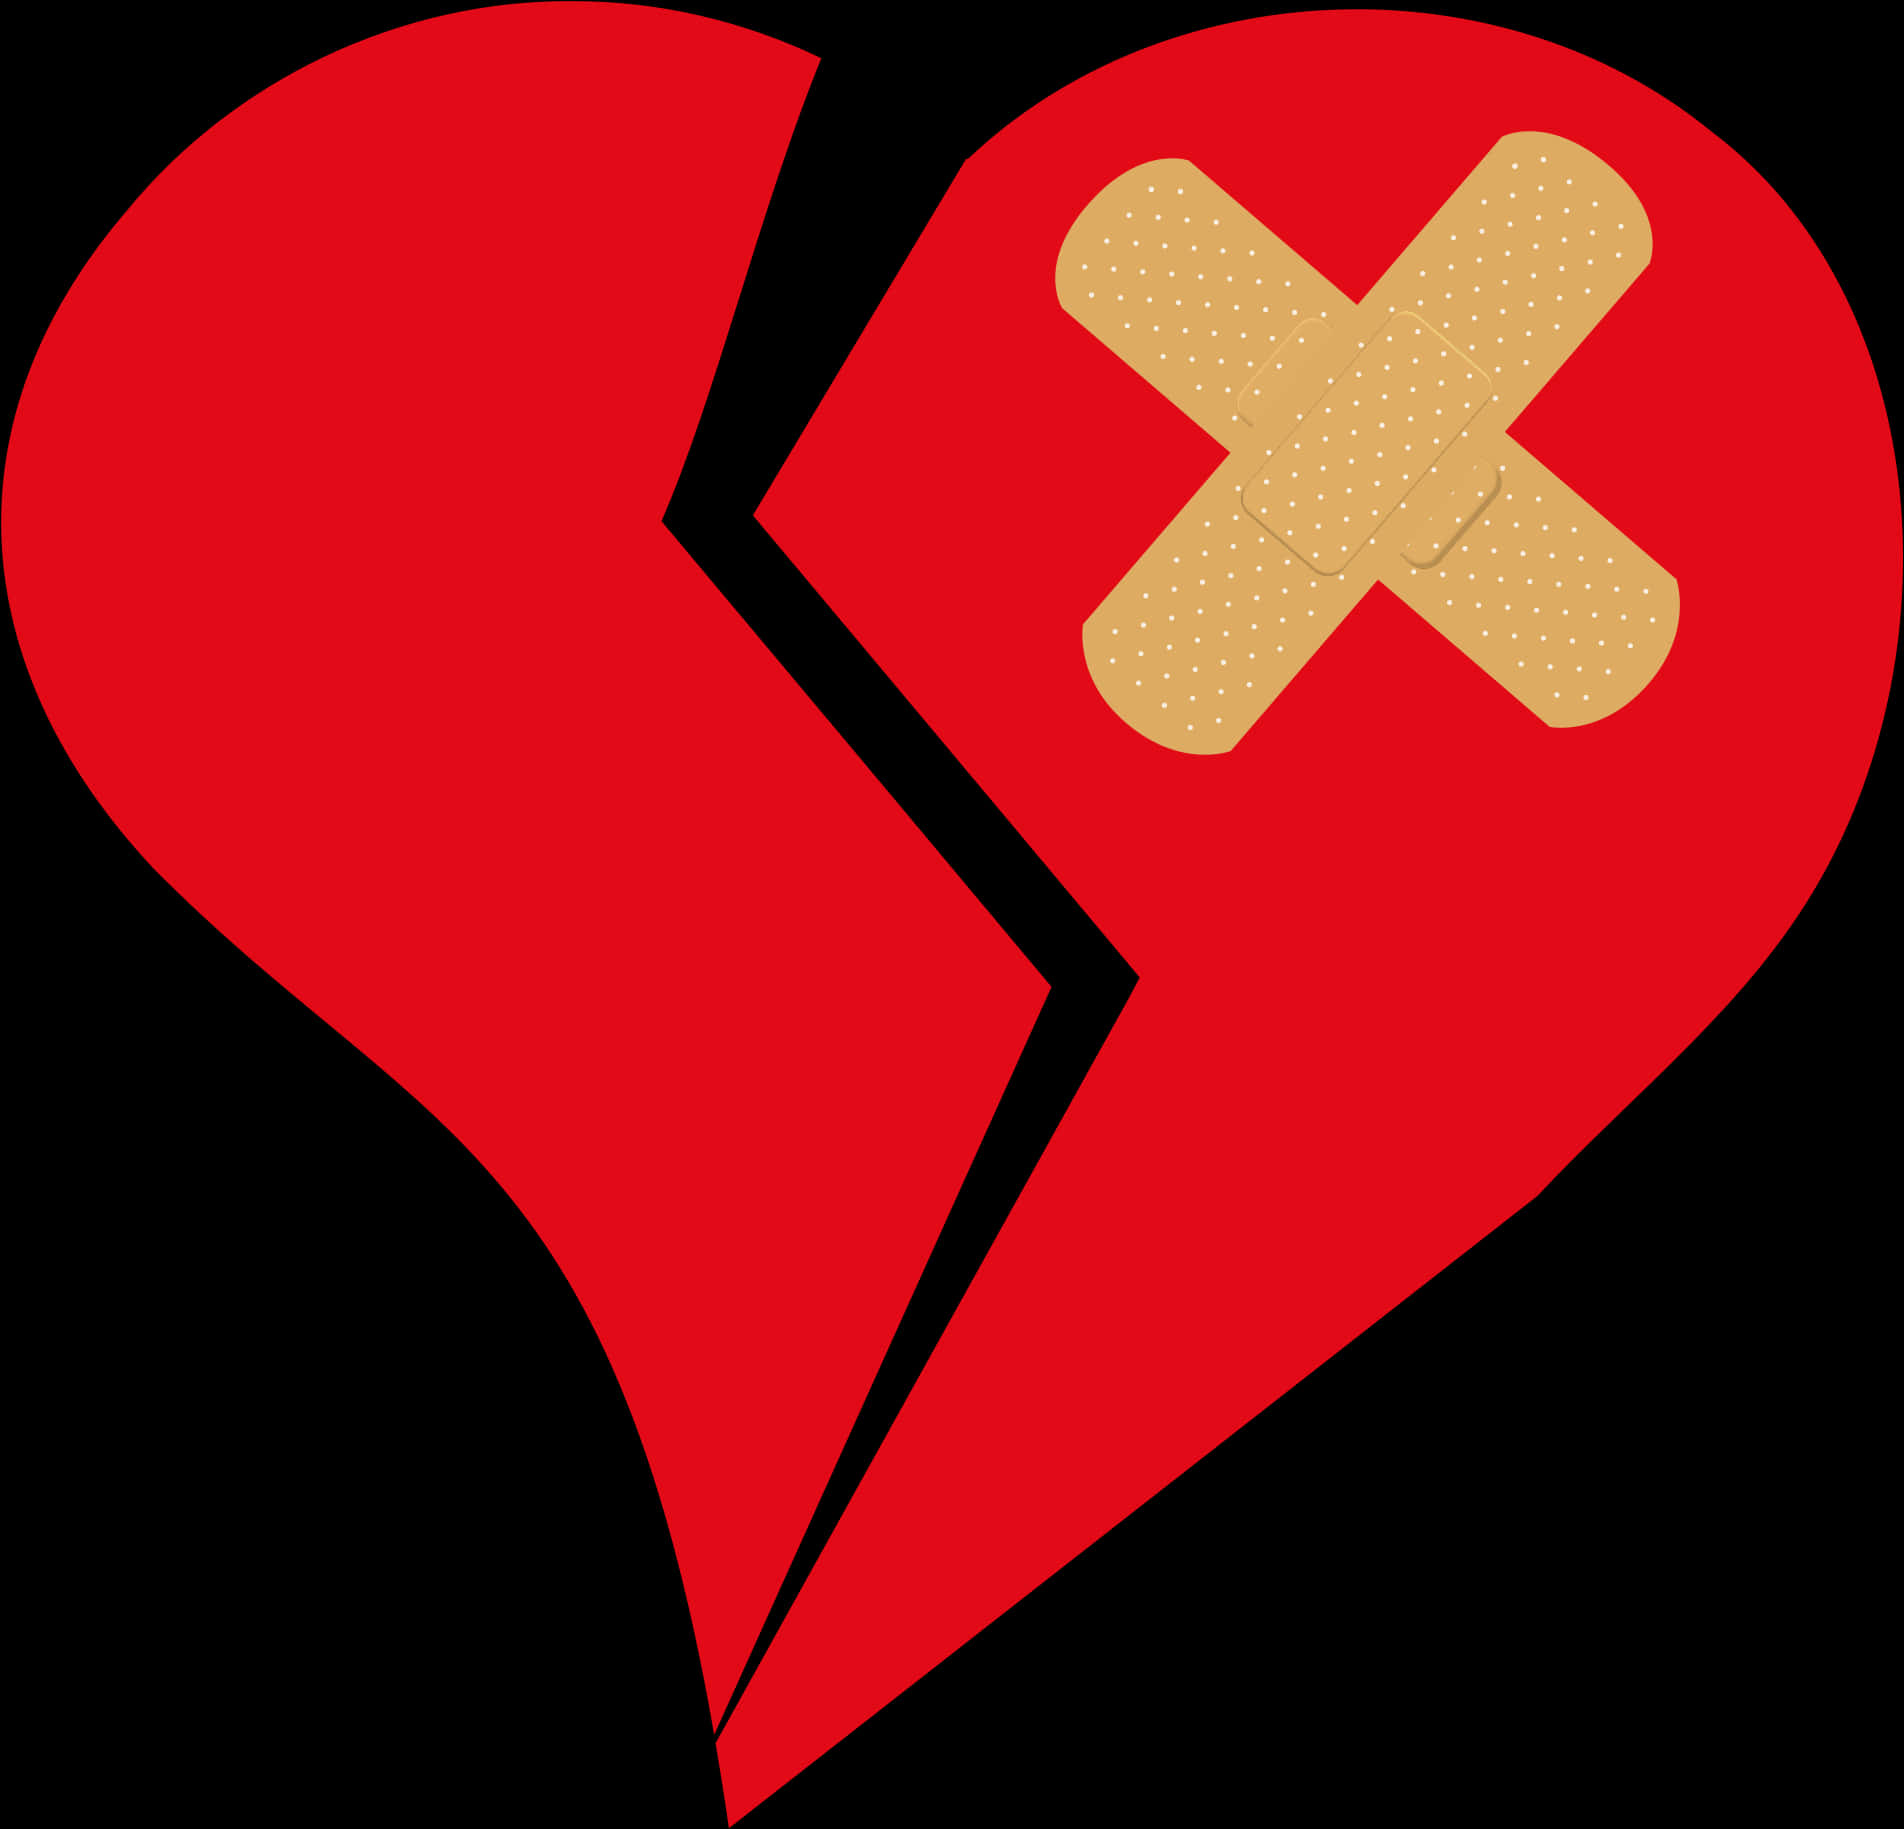 A Broken Heart With A Bandage On It